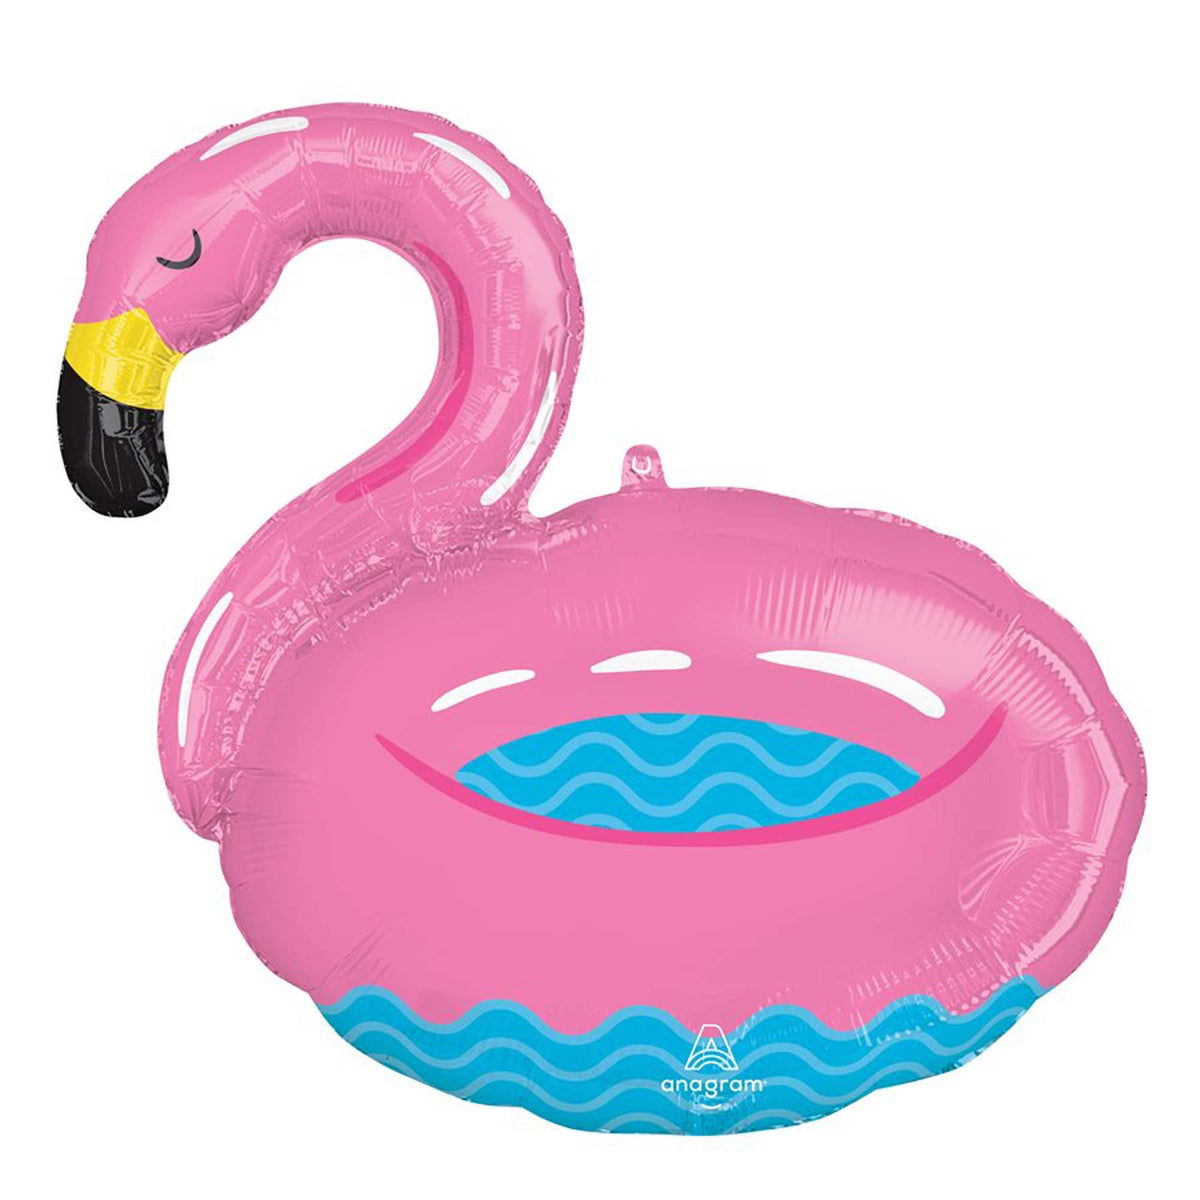 LE GROUPE BLC INTL INC Balloons Pool Party Flamingo Supershape Foil Balloon, 28 Inches, 1 Count